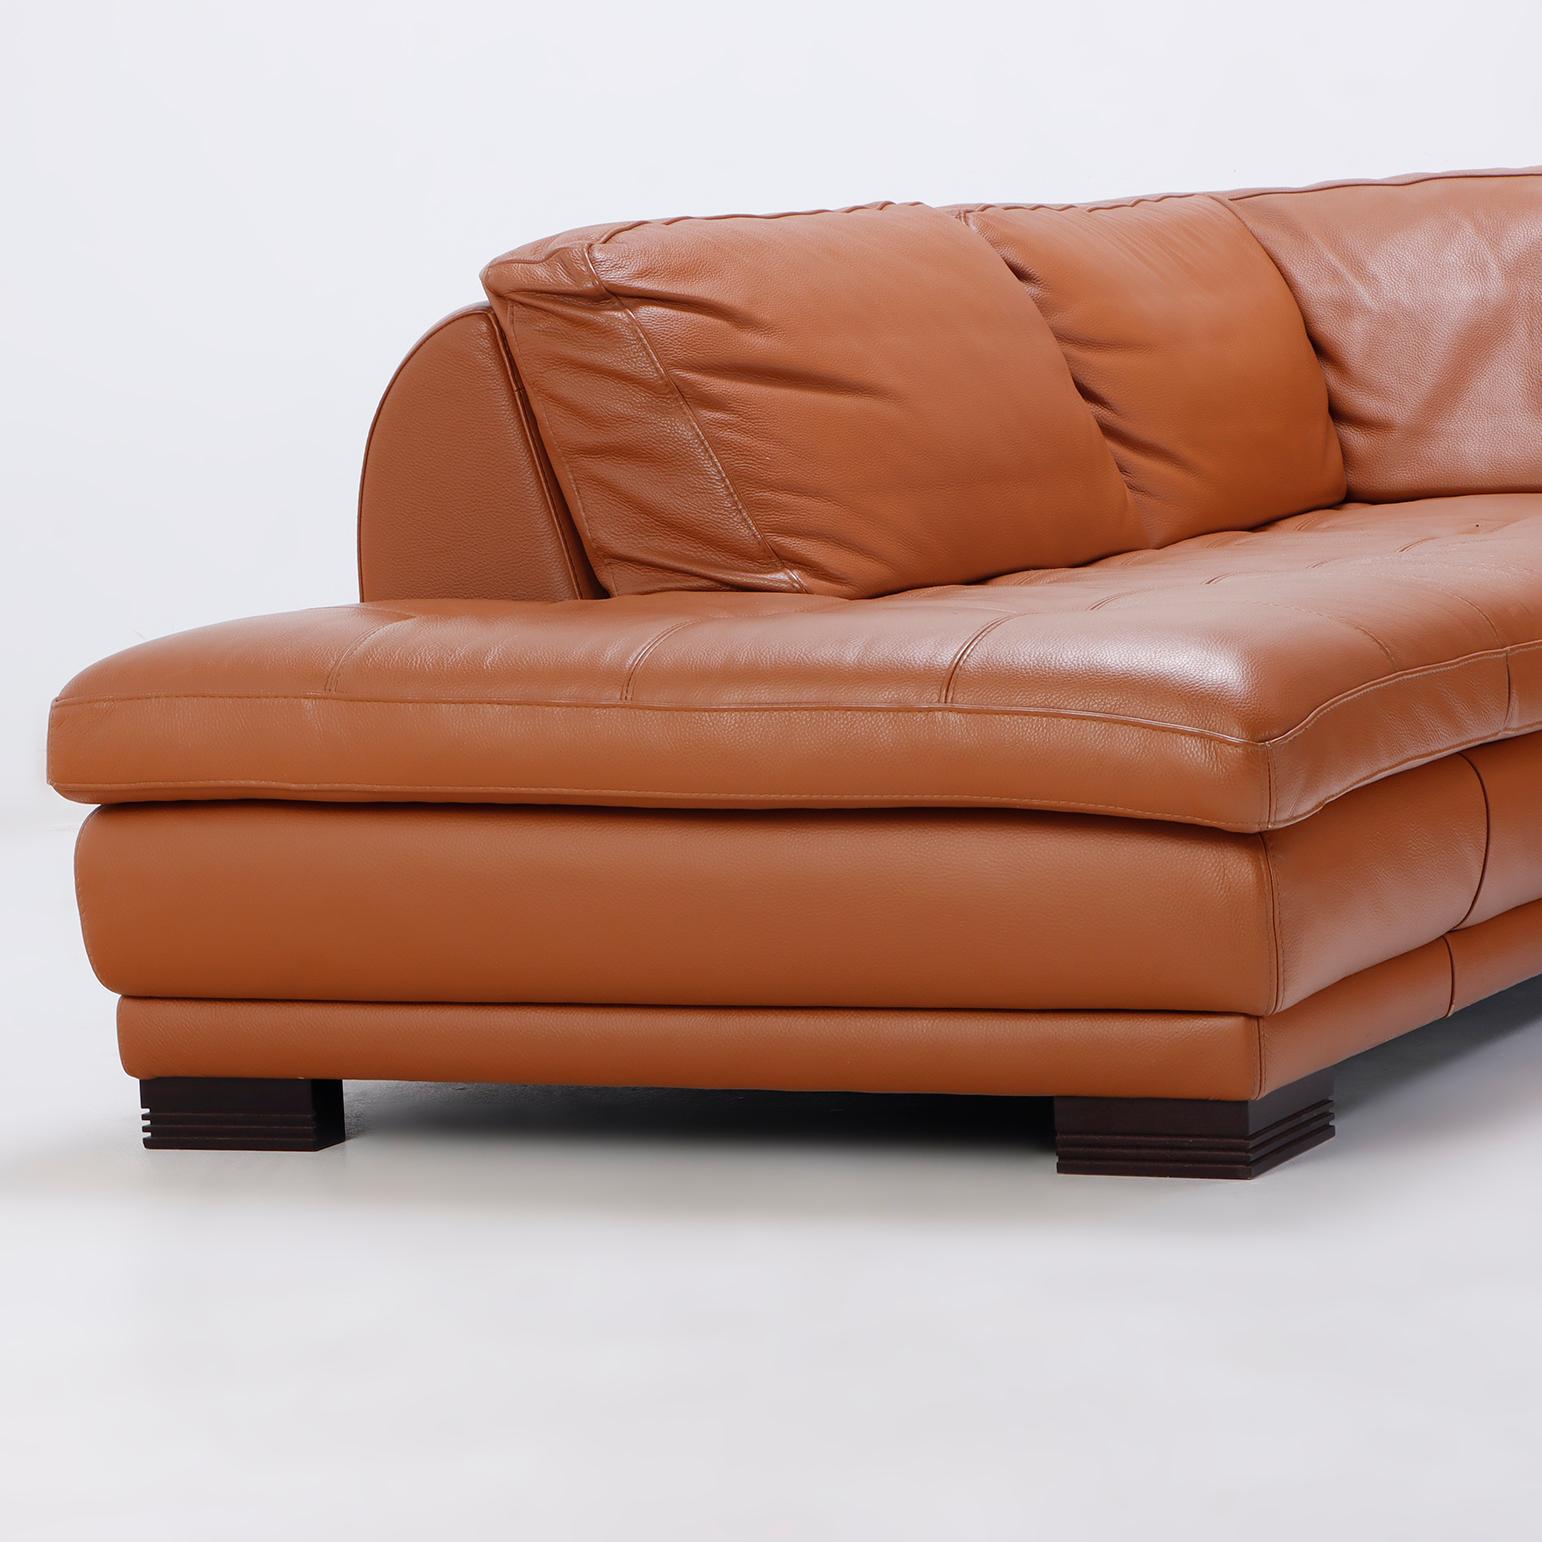 Adam Style A French Roche Bobois leather sectional sofa. For Sale